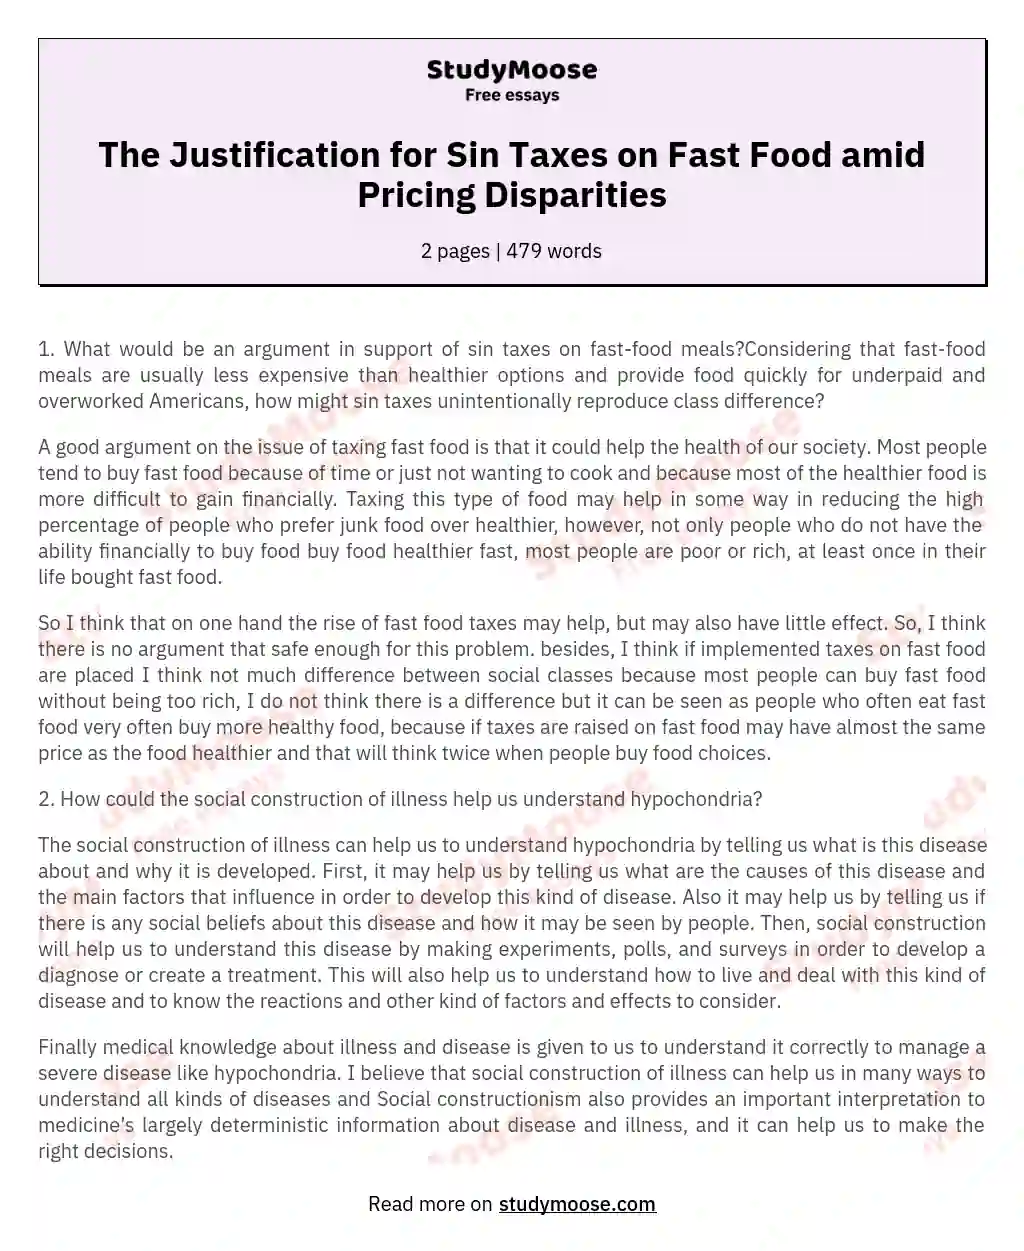 The Justification for Sin Taxes on Fast Food amid Pricing Disparities